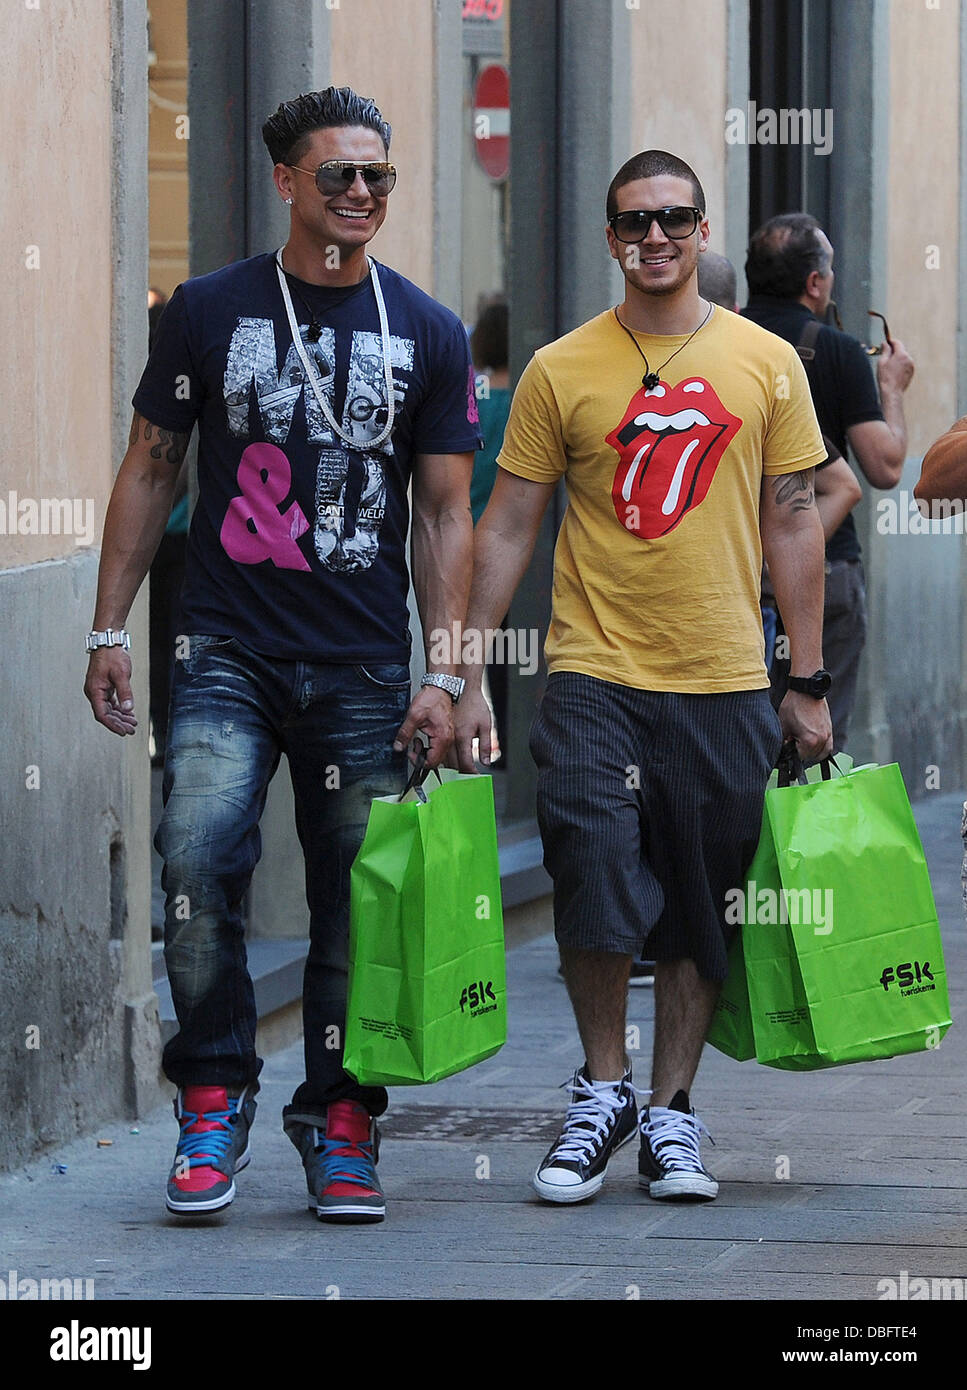 Paul "Pauly D" DelVecchio and Vinny Guadagnino Jersey Shore cast members  buying yet more trainers from the FSK footwear shop. Florence, Italy -  15.06.11 Stock Photo - Alamy